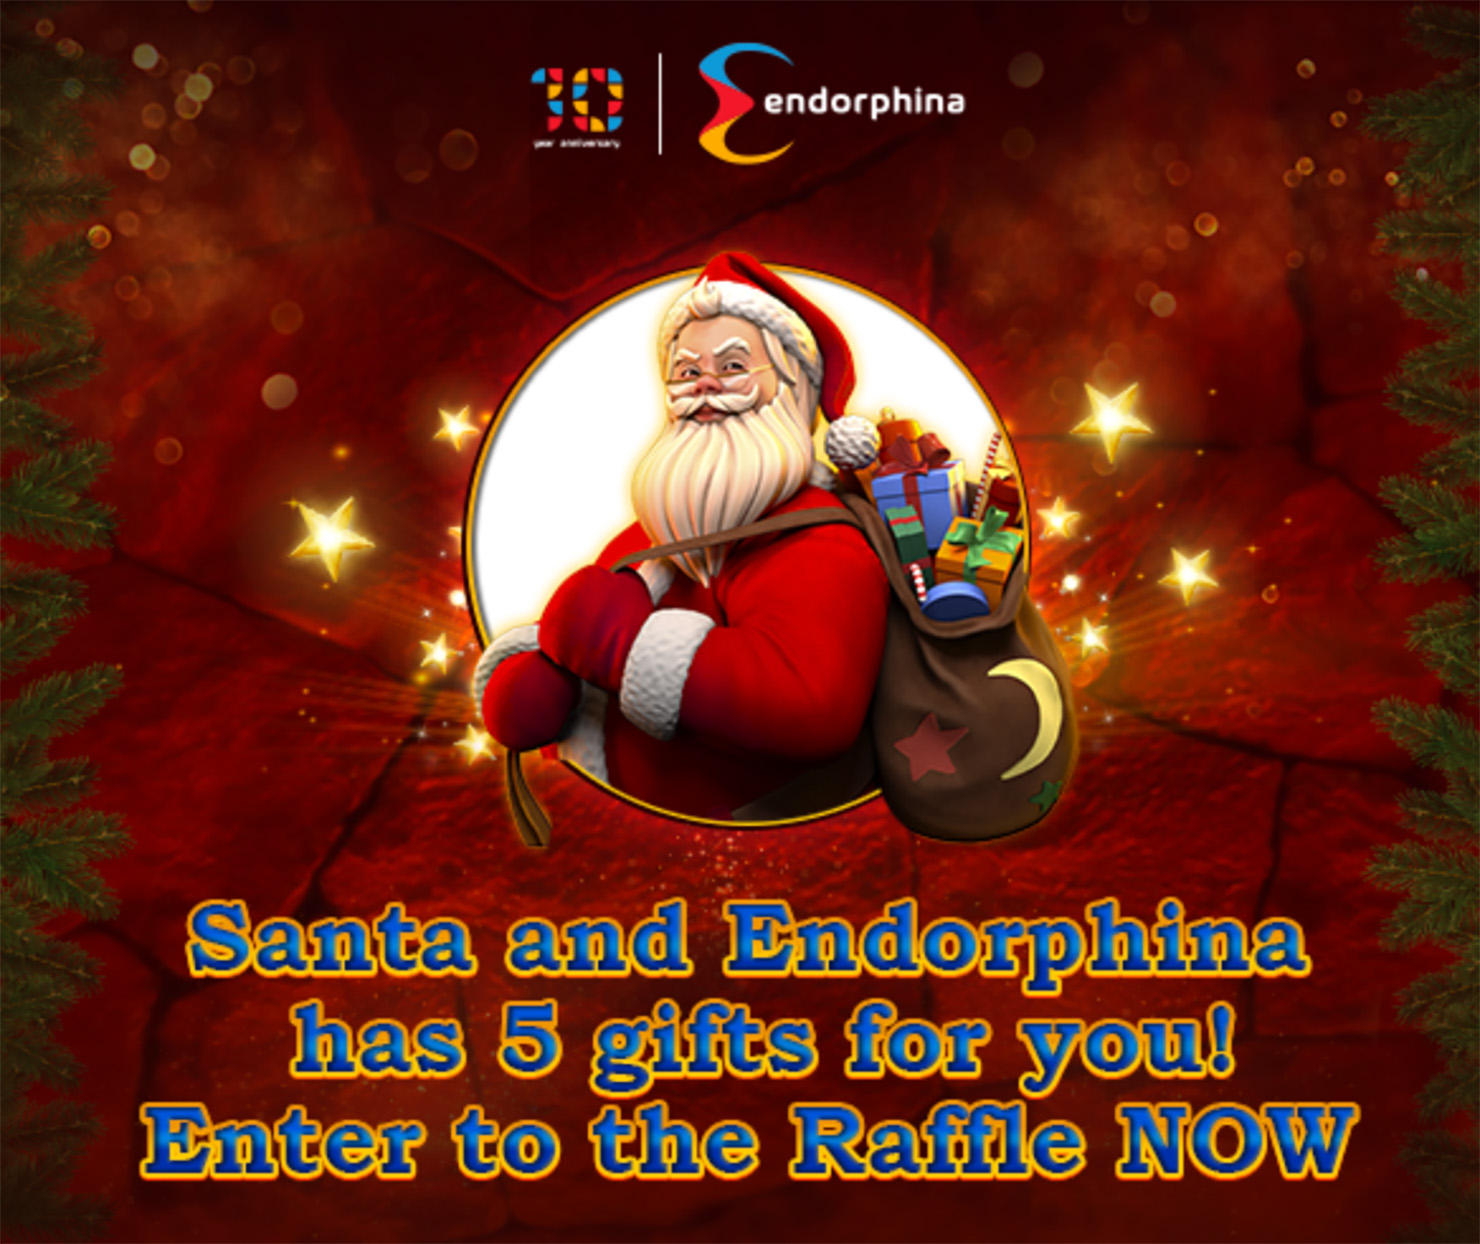 We’ve partnered with Santa and have 5 gifts waiting for you!